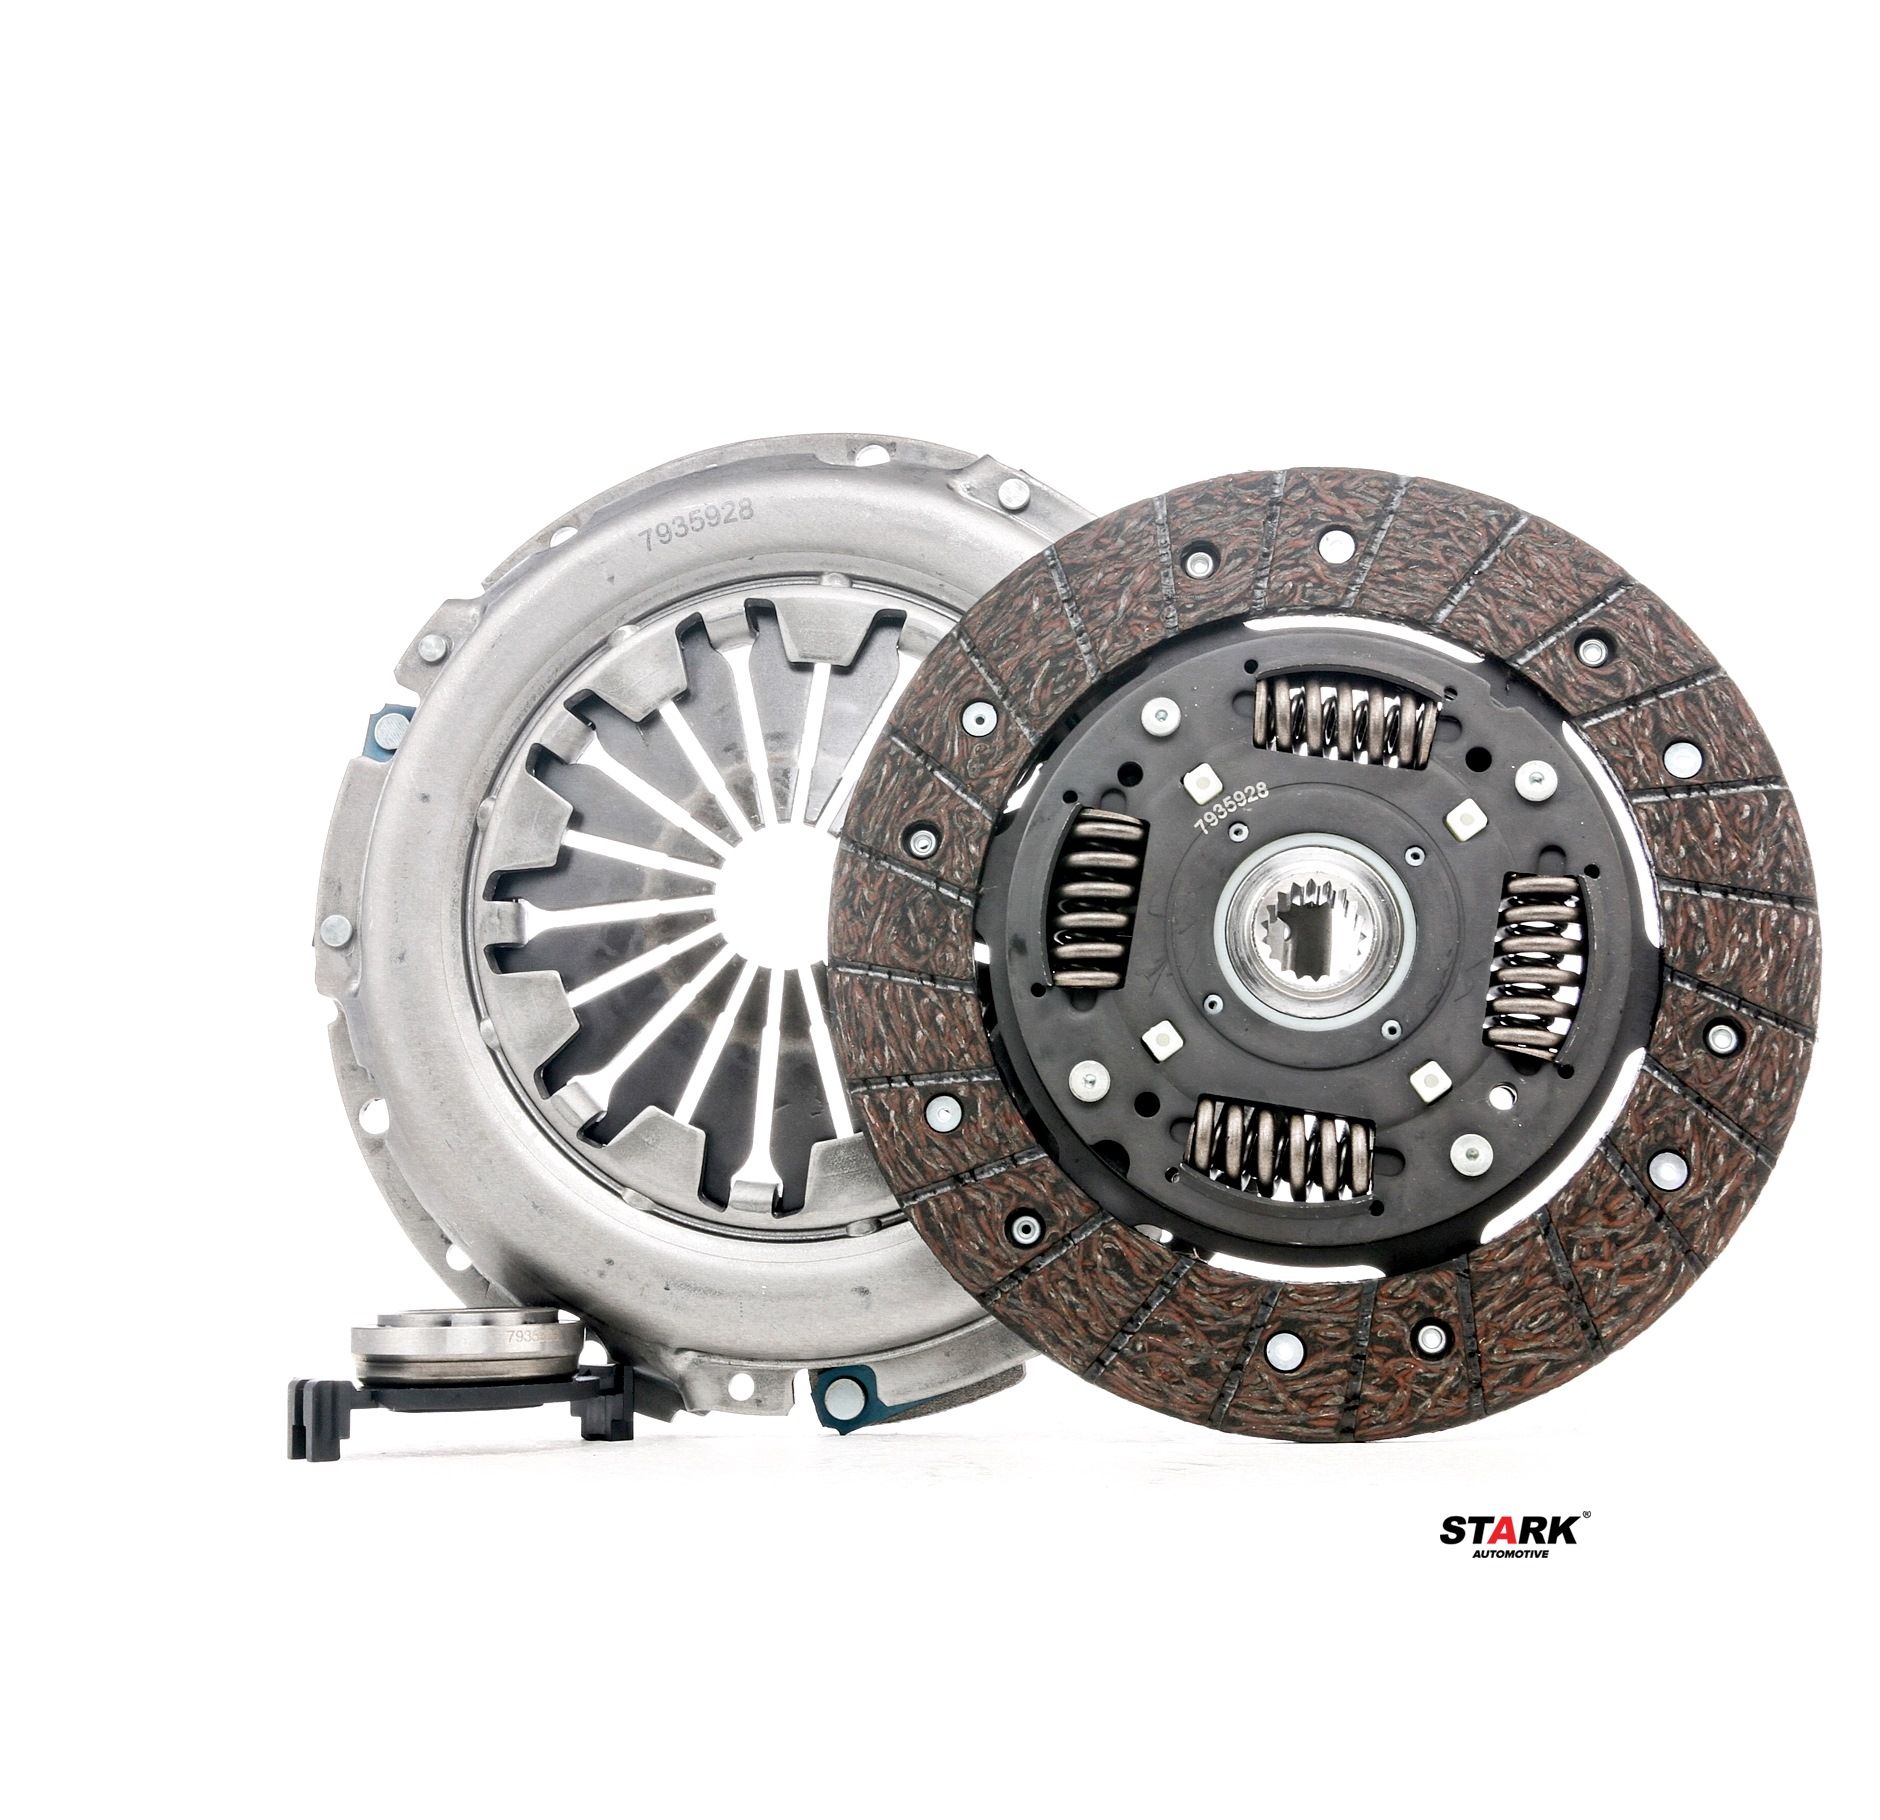 STARK SKCK-0100030 Clutch kit three-piece, with clutch release bearing, with clutch disc, without flywheel, with bearing(s), 200mm